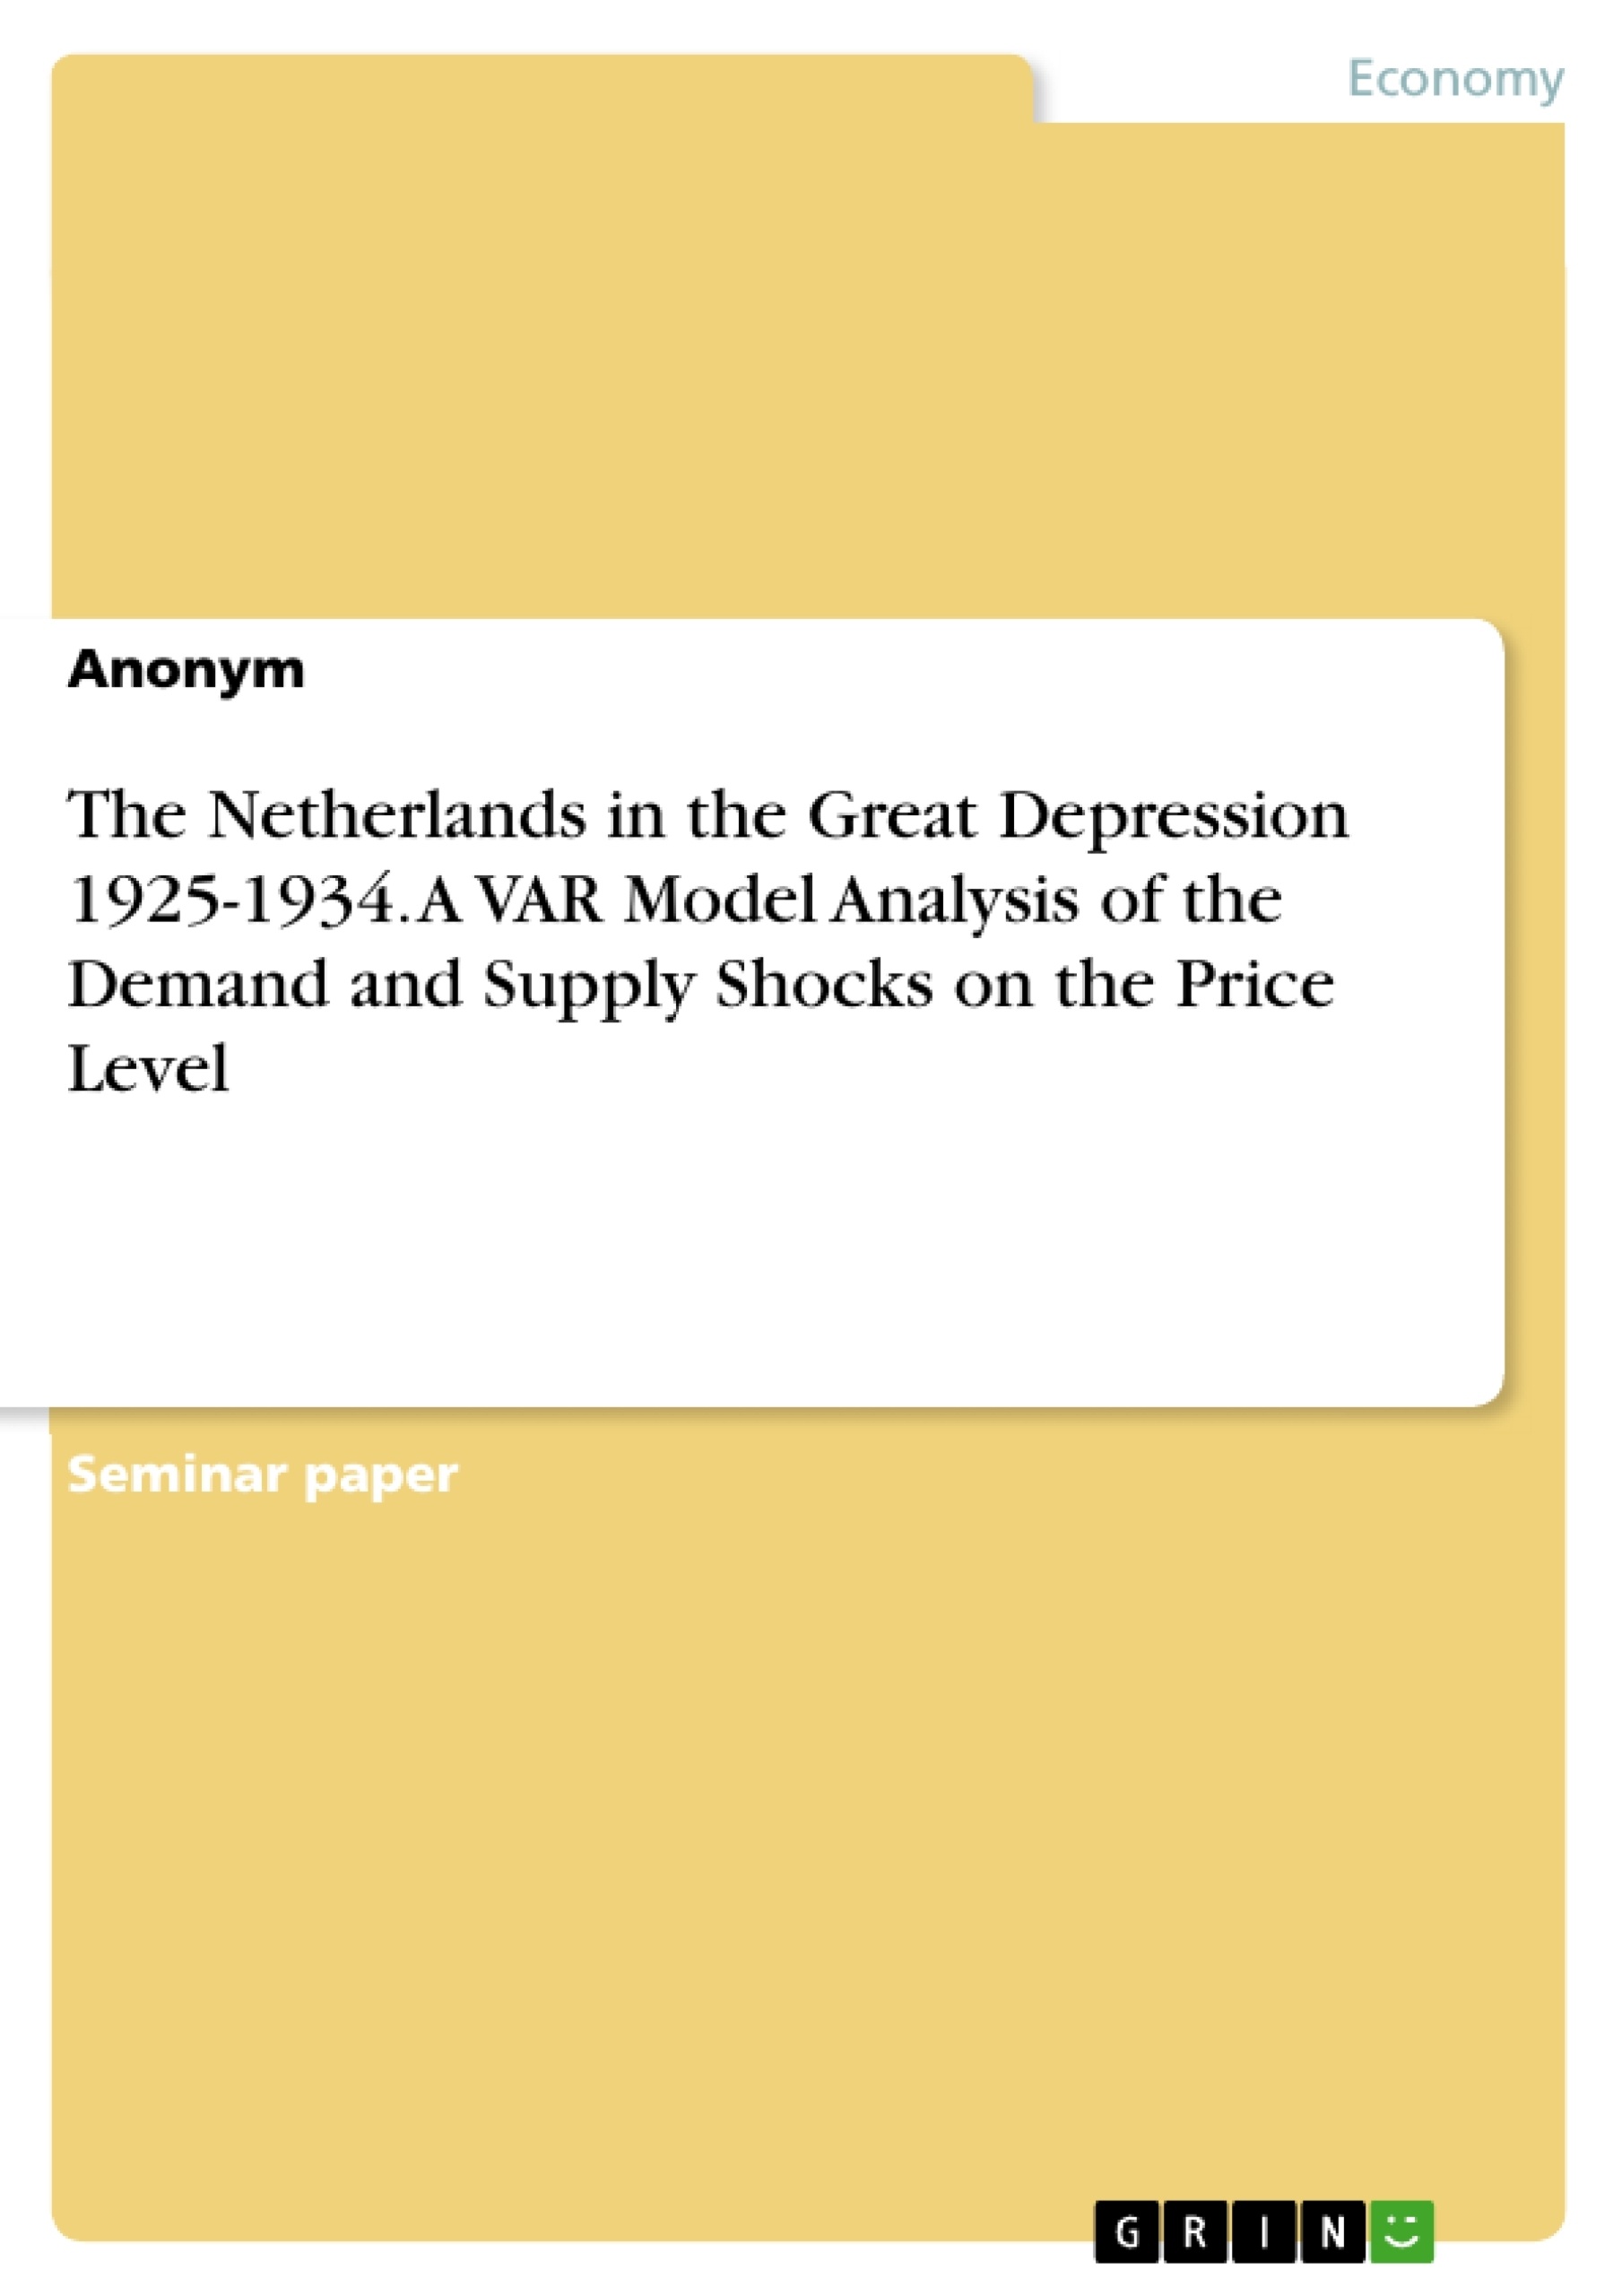 Title: The Netherlands in the Great Depression 1925-1934. A VAR Model Analysis of the Demand and Supply Shocks on the Price Level